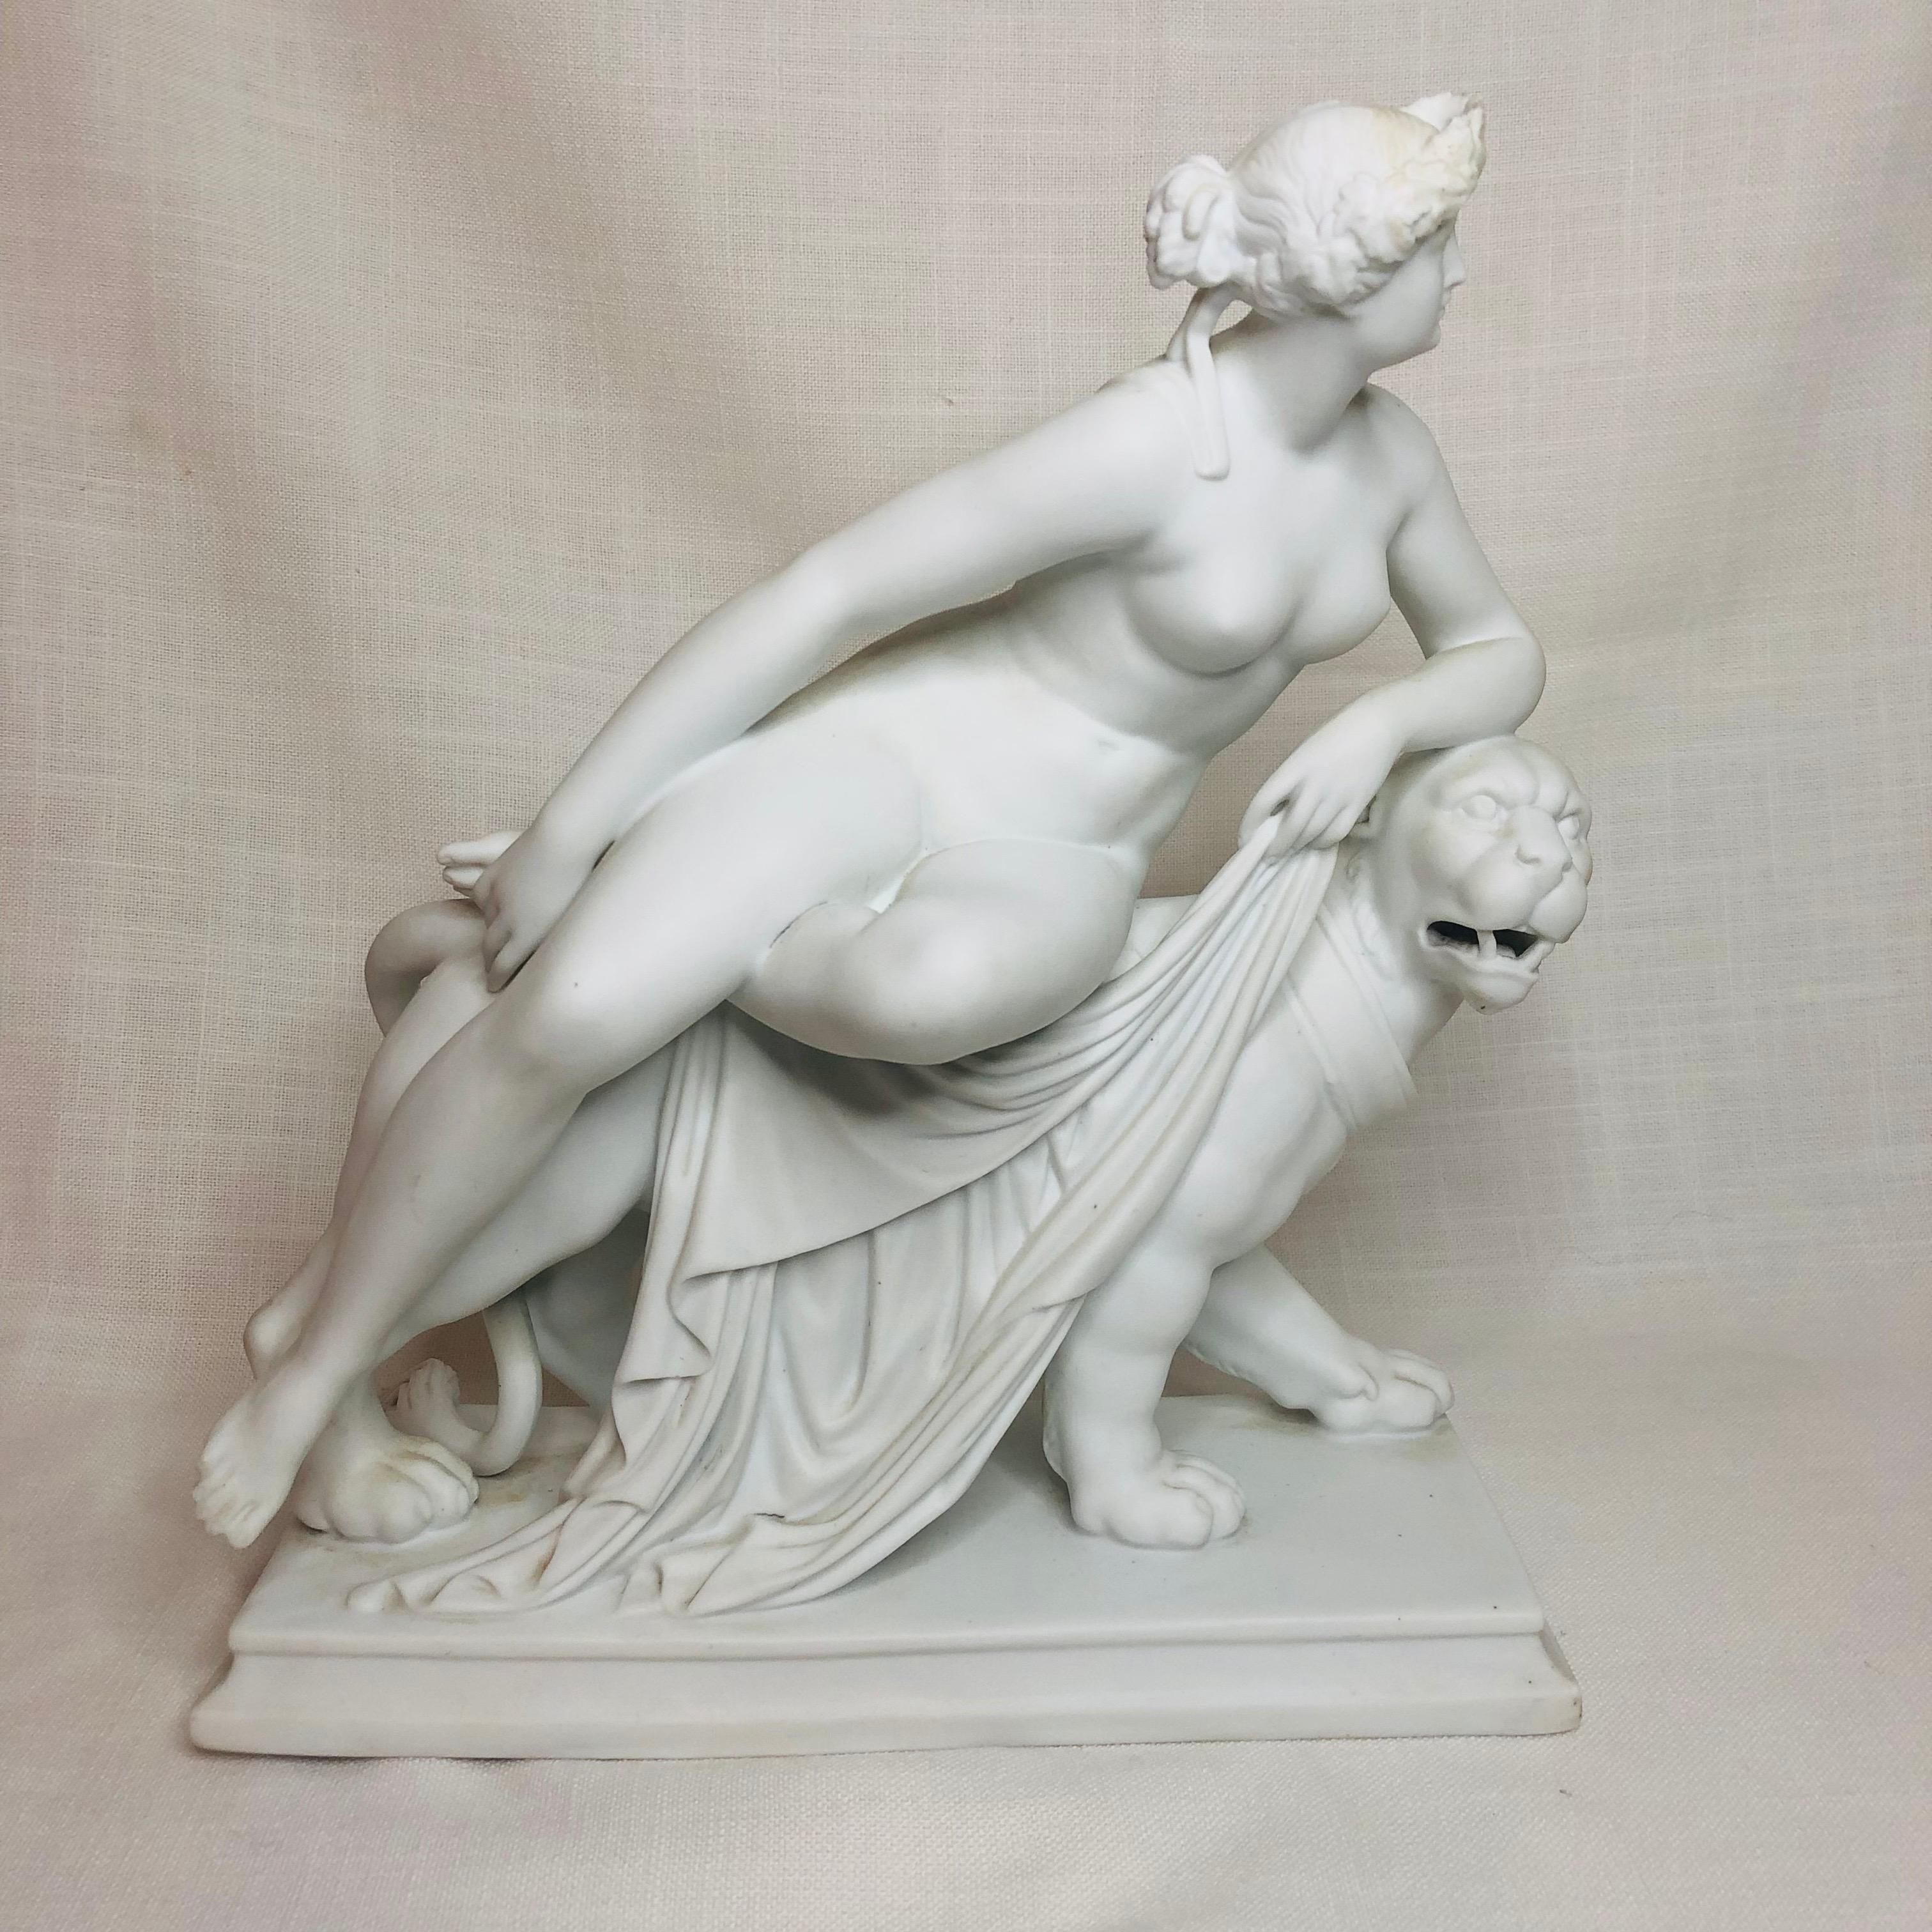 Neoclassical English Parian Figurine of a Nude Figure of Adriadne Riding on Top of a Panther